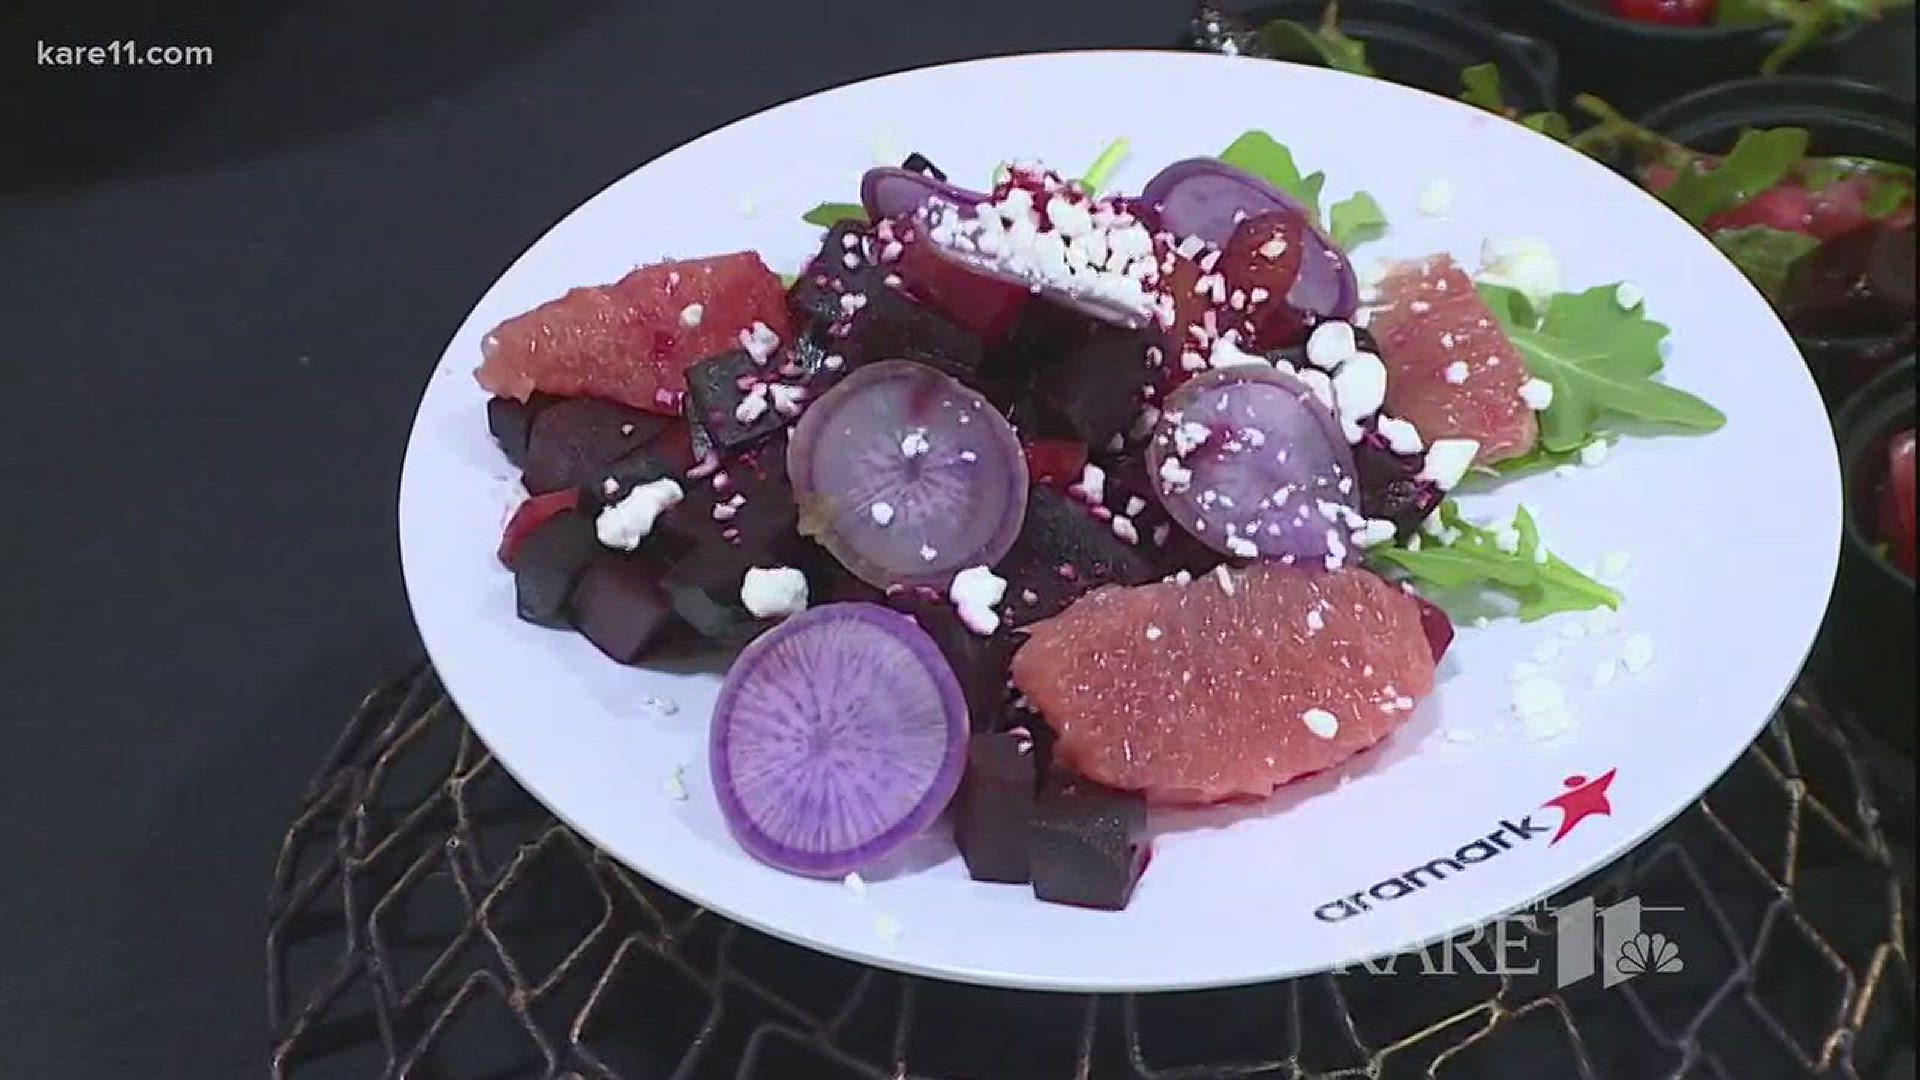 The U.S. Bank Stadium chef shows us how to put together a winter beet salad.